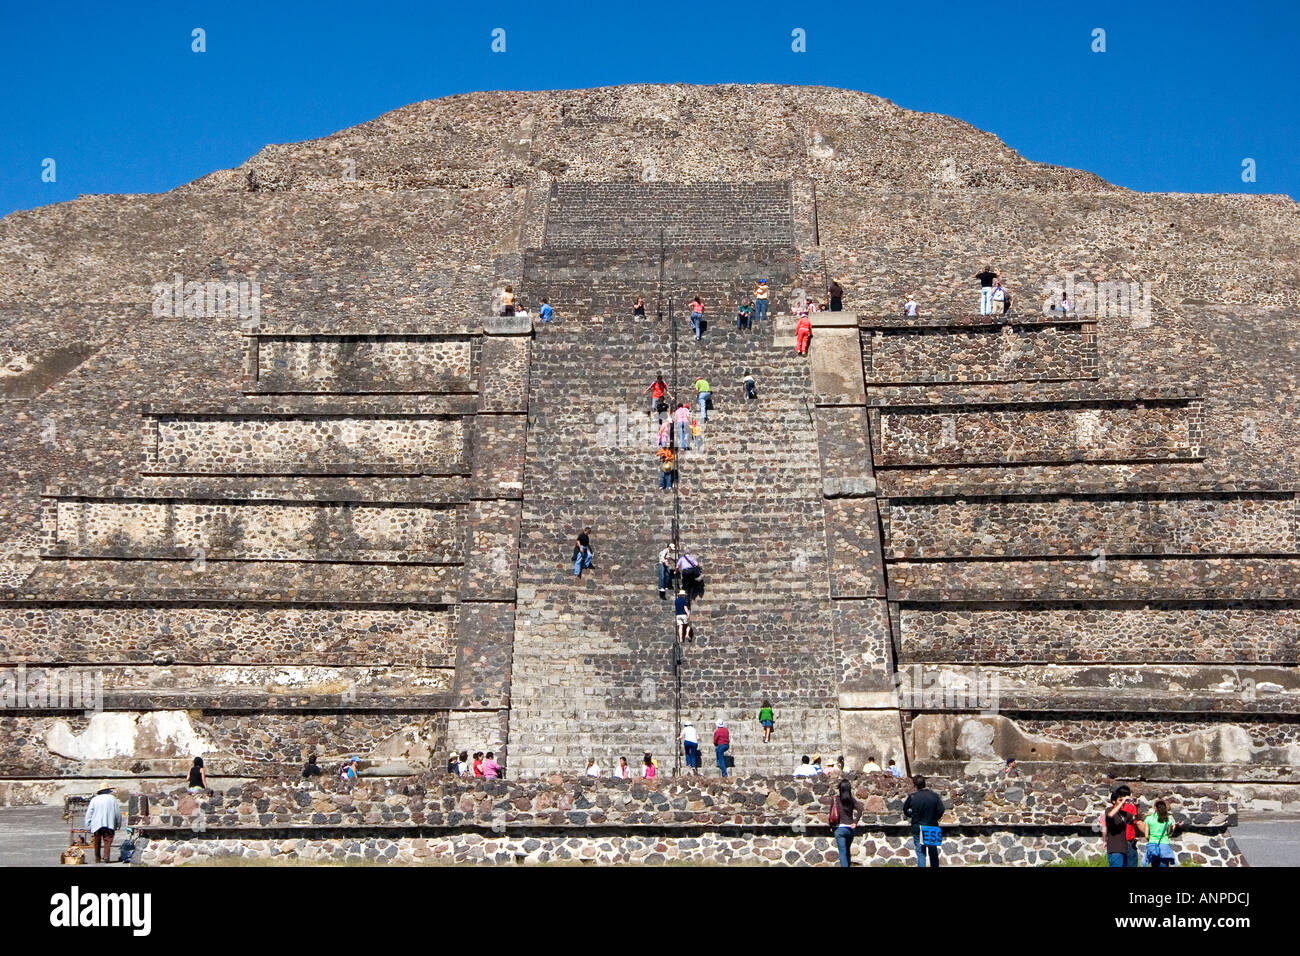 Tourists visit the Pyramid of the Moon at Teotihuacan in the State of Mexico Mexico Stock Photo